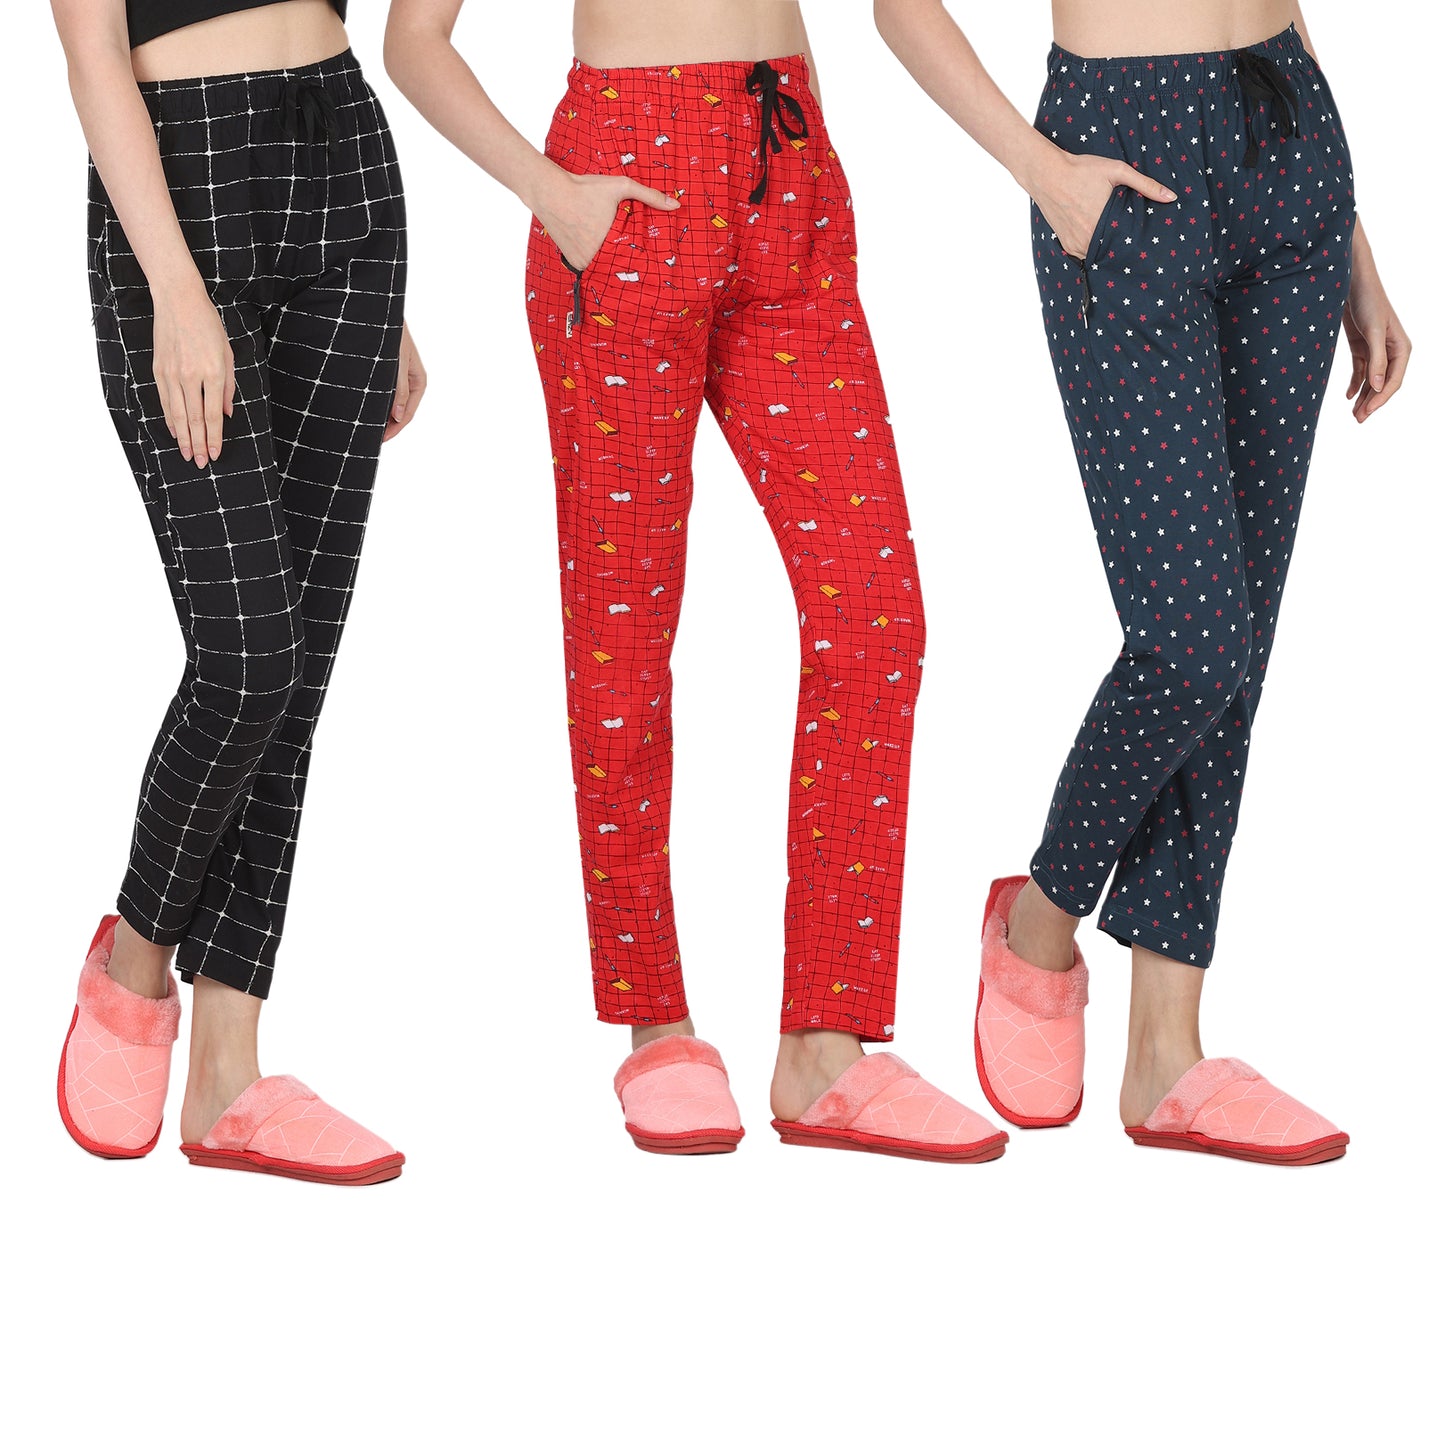 Eazy Women's Printed Lower - Pack of 3 - Black, Bright Red & Pine Green